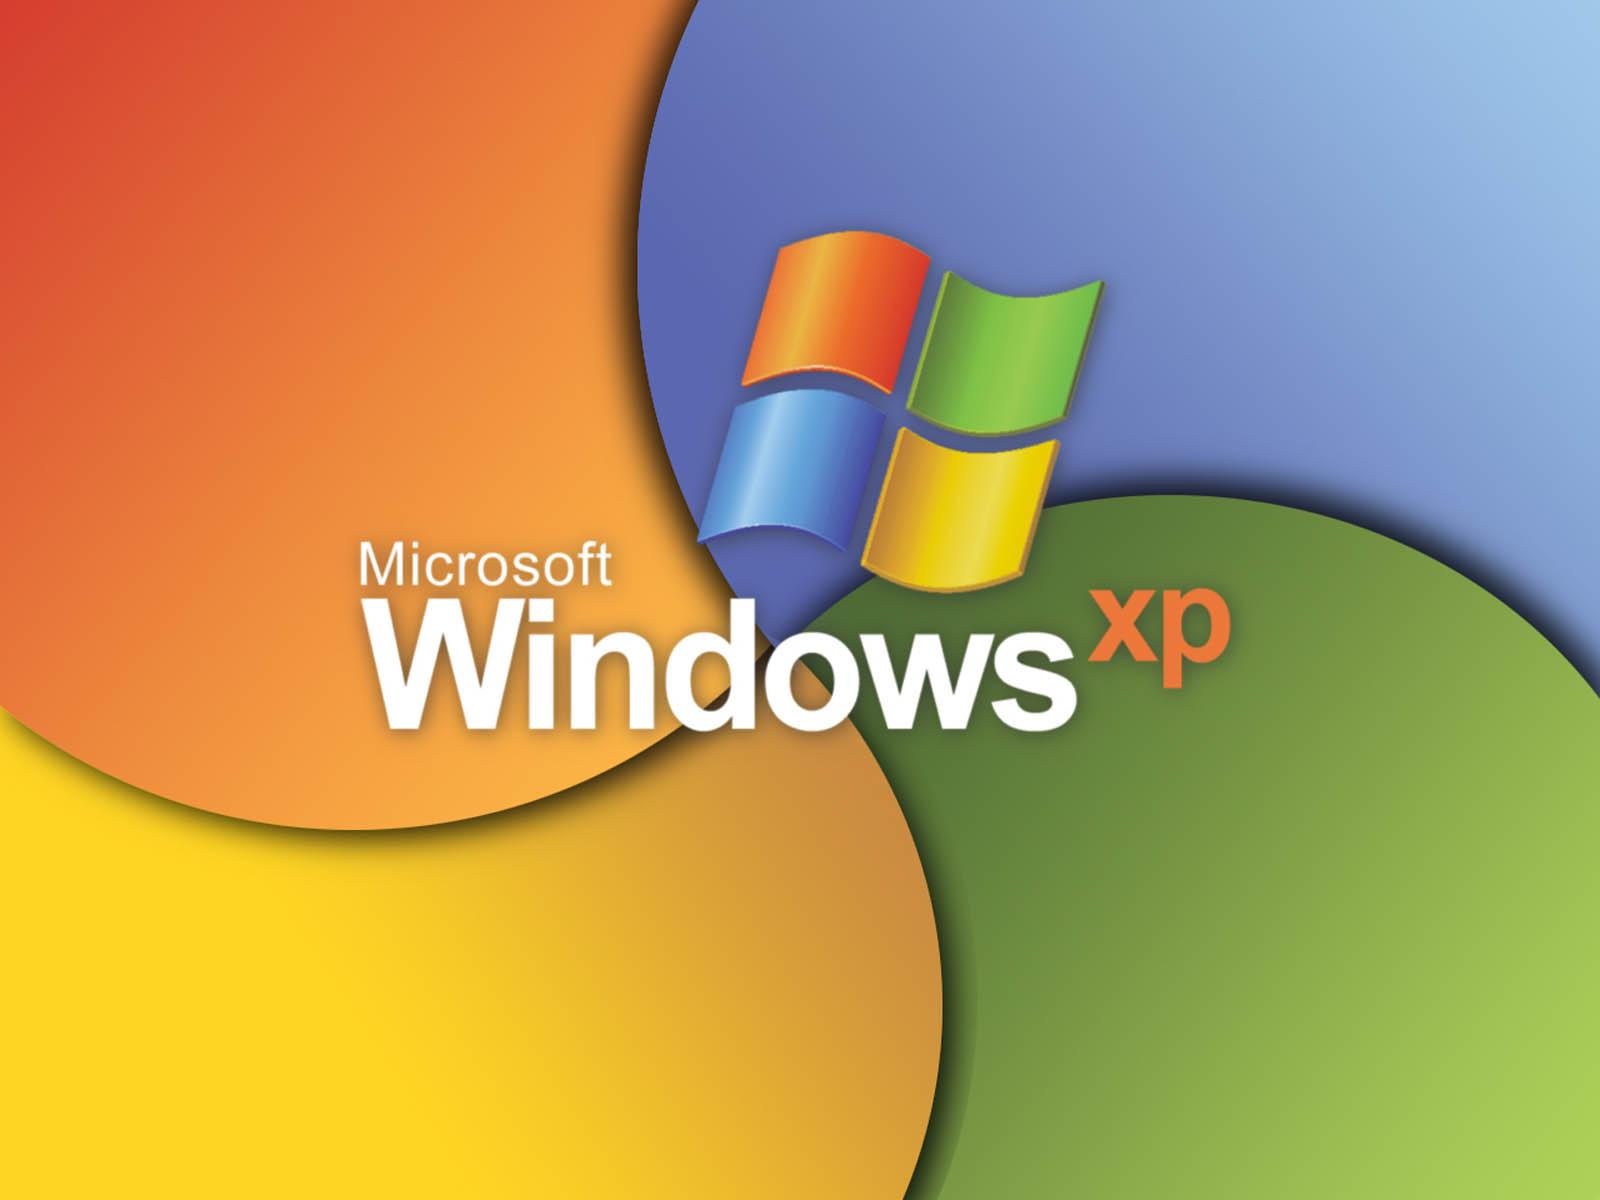 WinXP Logo - Download 45 HD Windows XP Wallpapers for Free